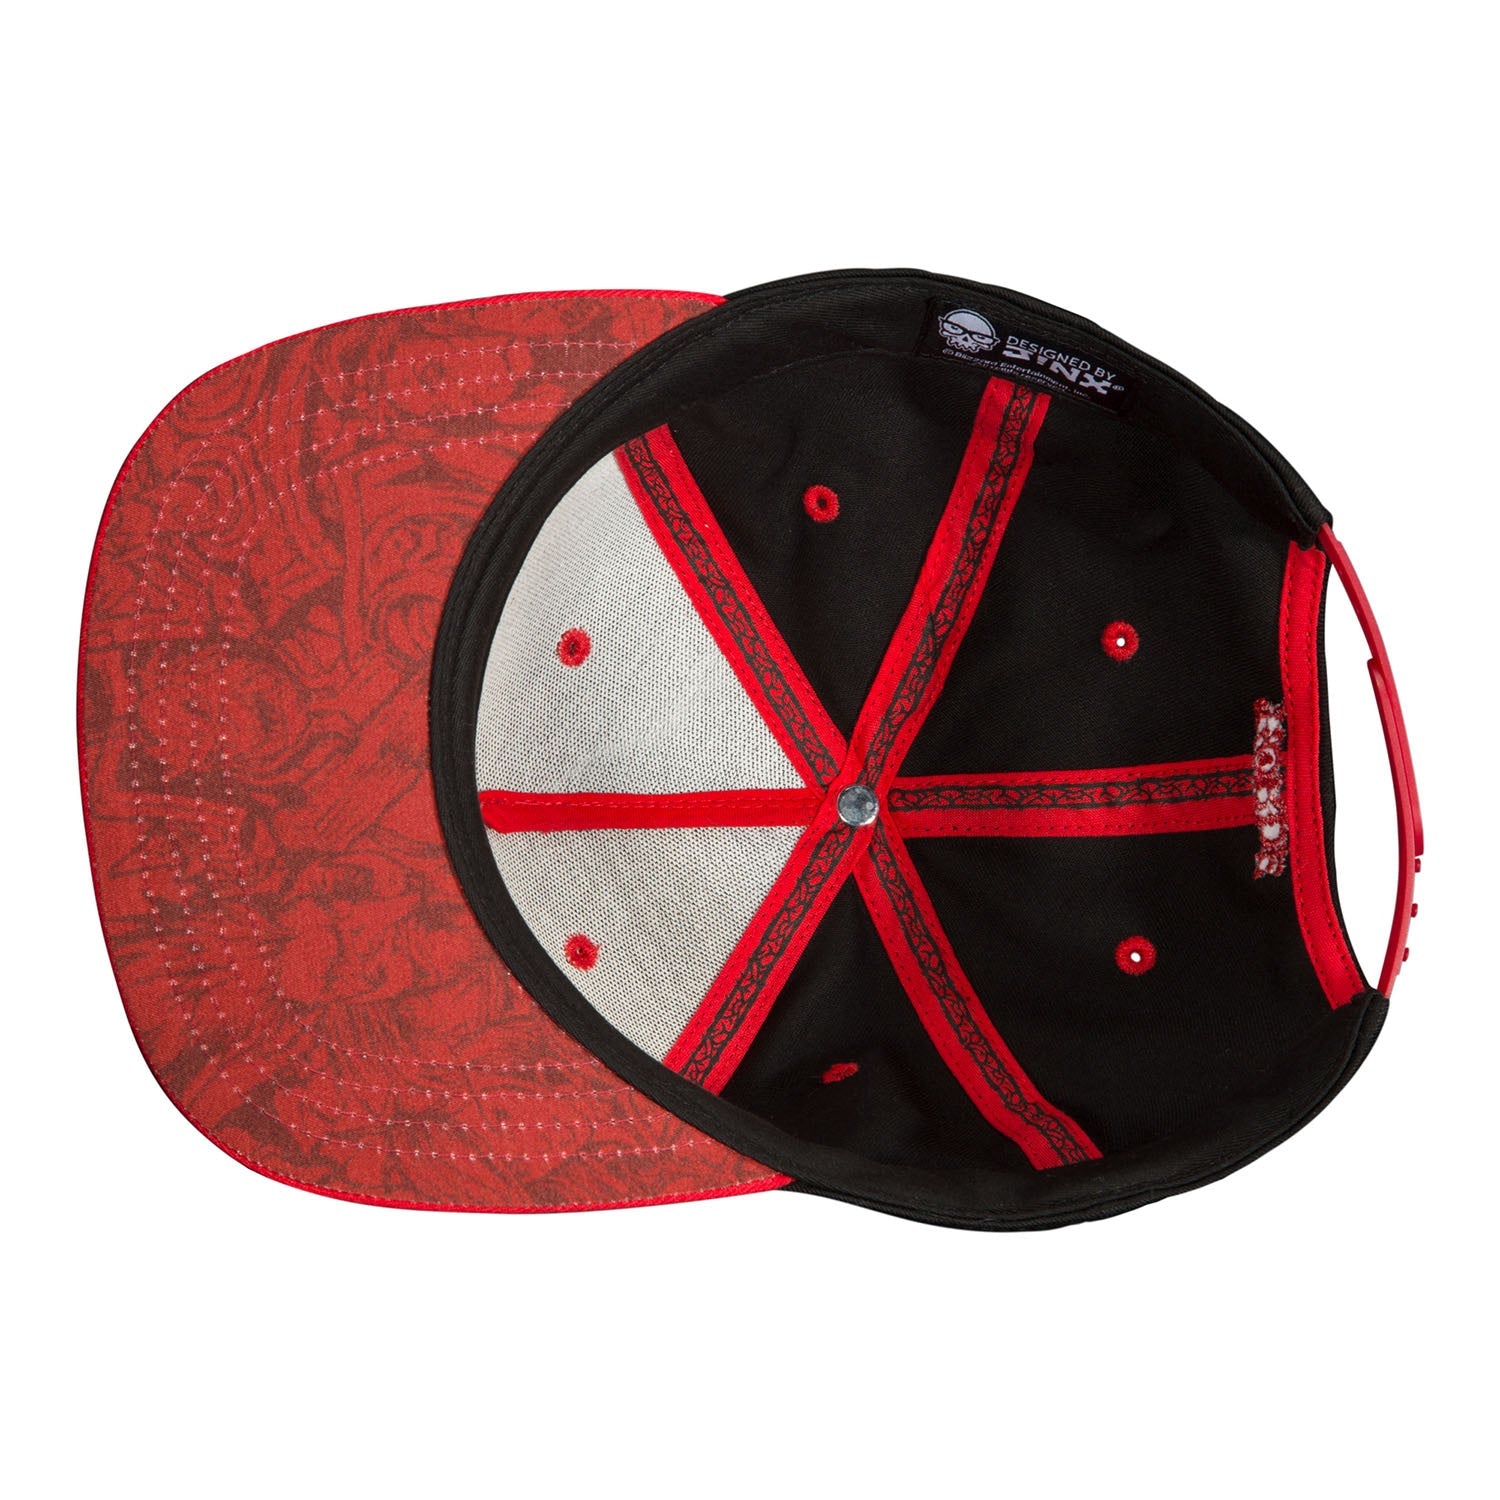 Get ready to elevate your cap game to a whole new universe, with